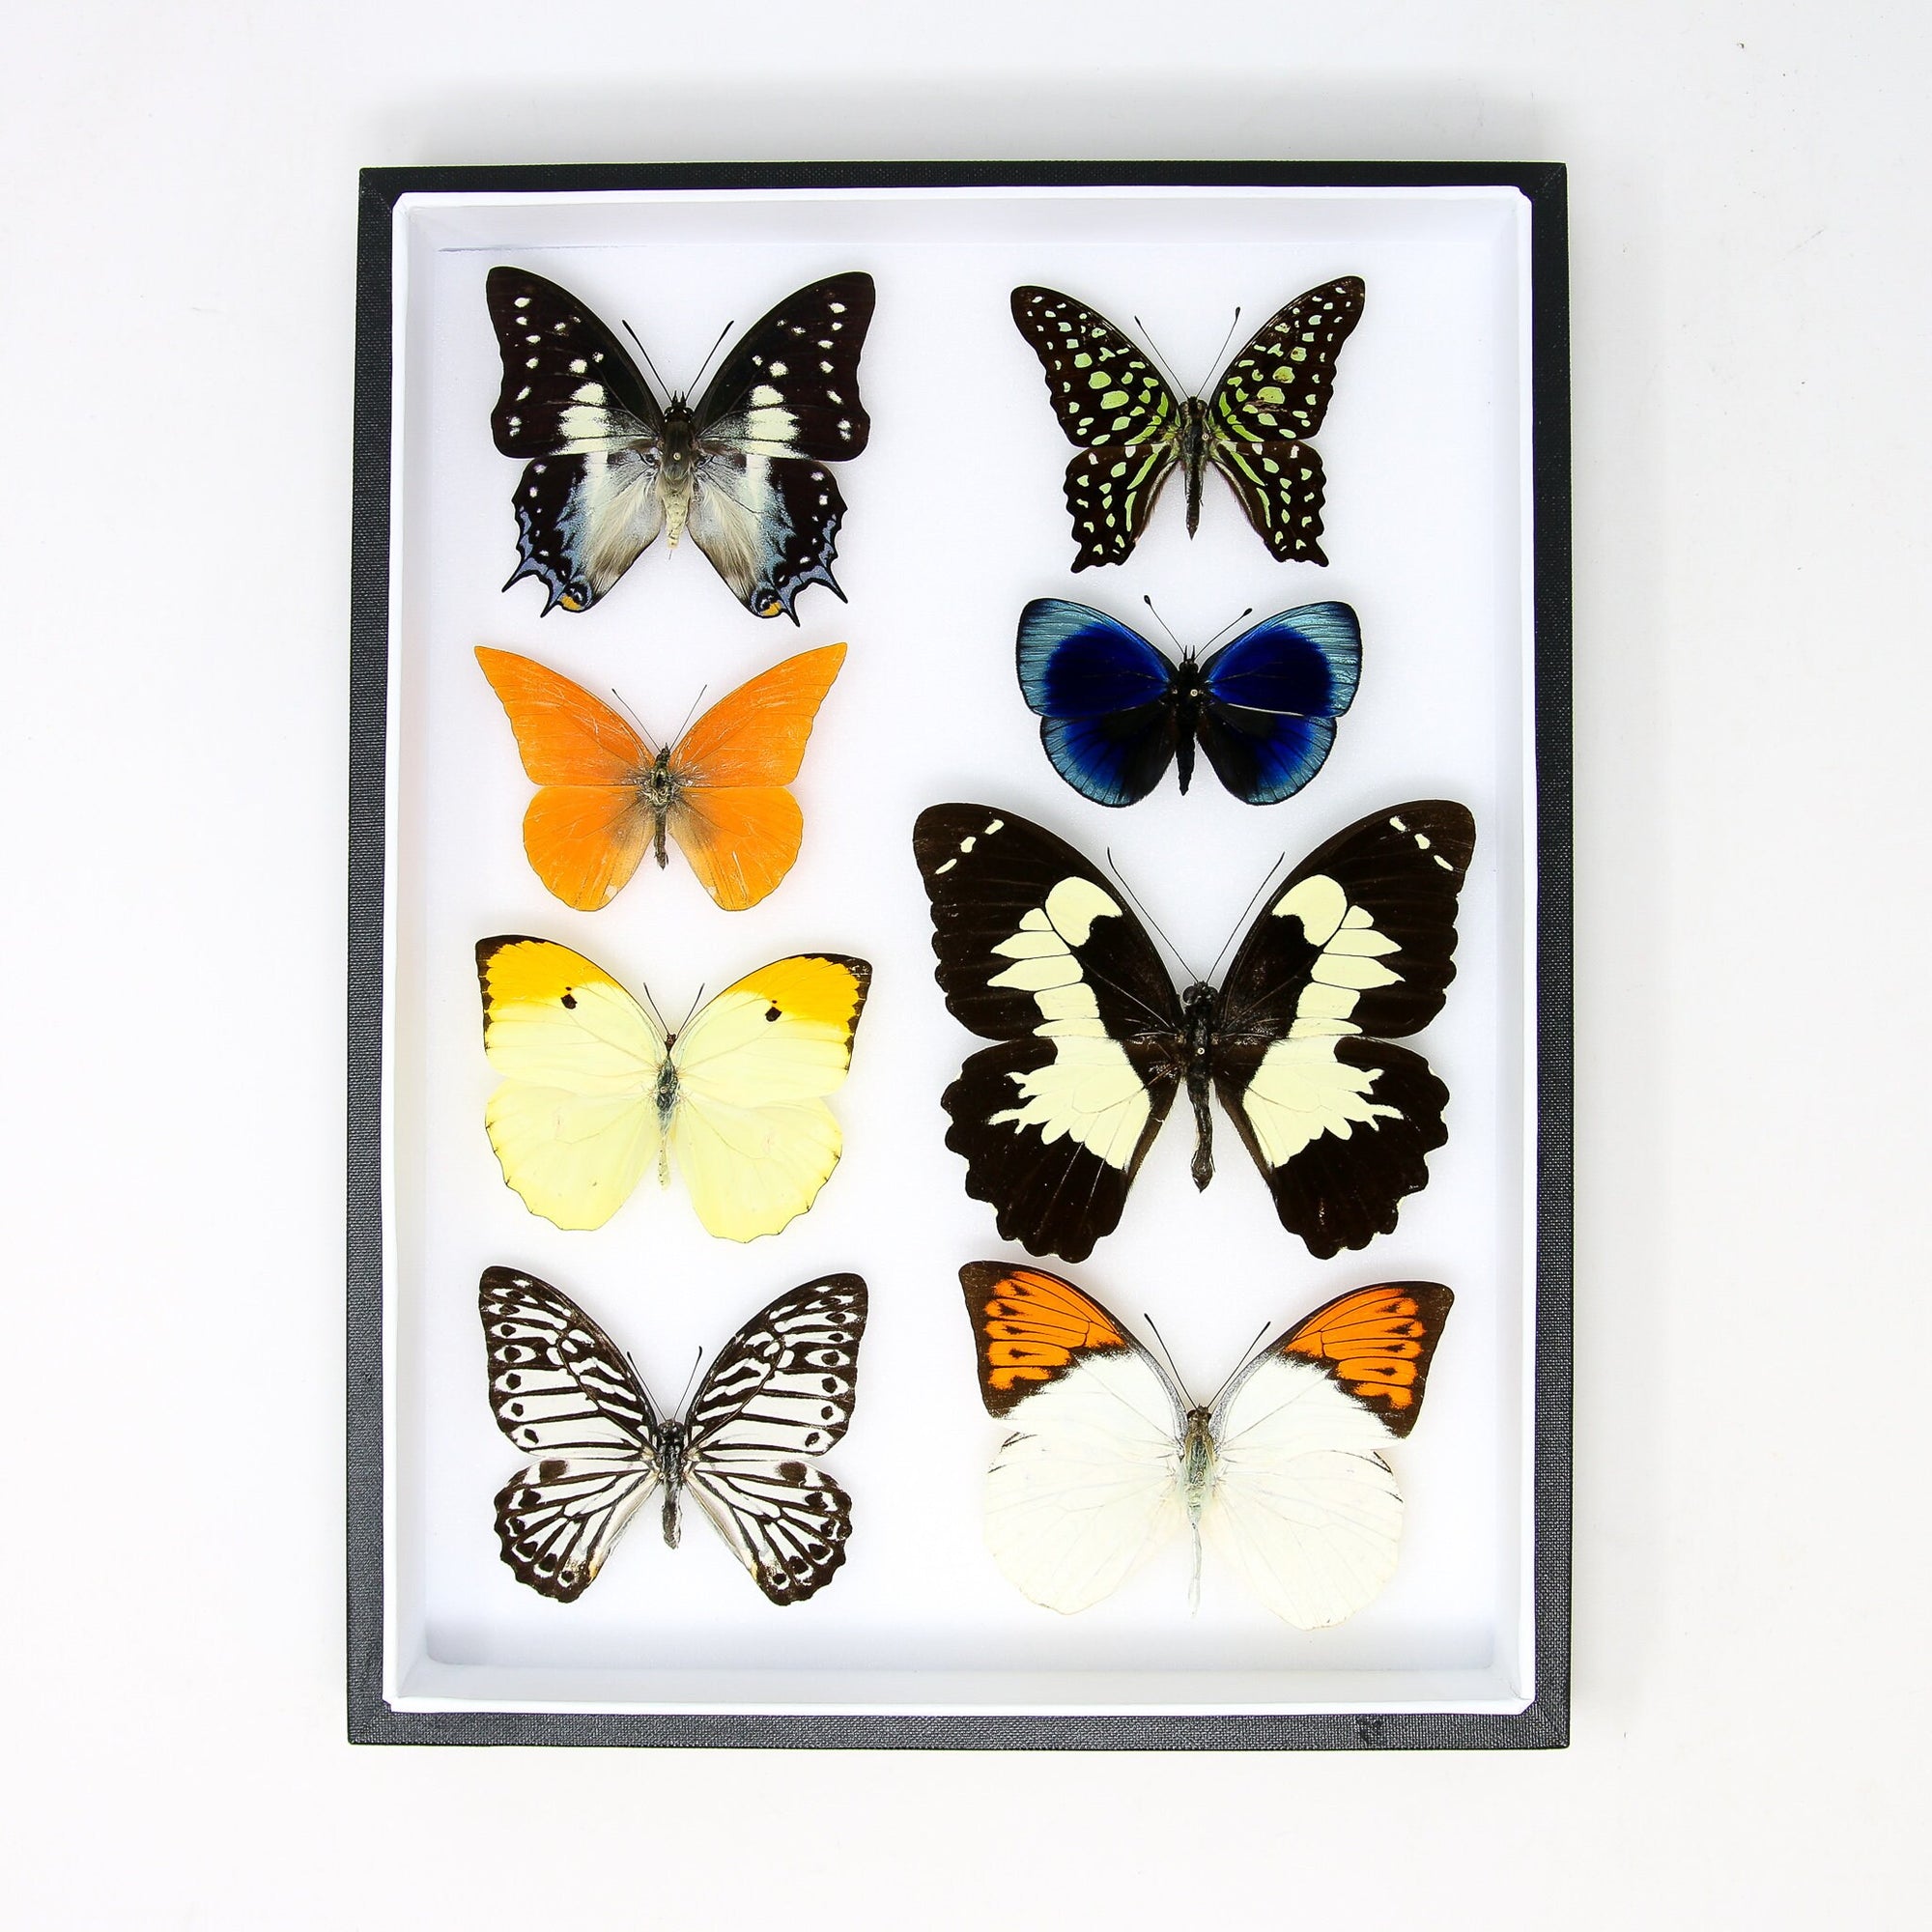 EIGHT (8) Assorted Tropical Butterflies with WINGS SPREAD | Pinned in Entomology Display Box with Glass Lid 12x9x2 inch